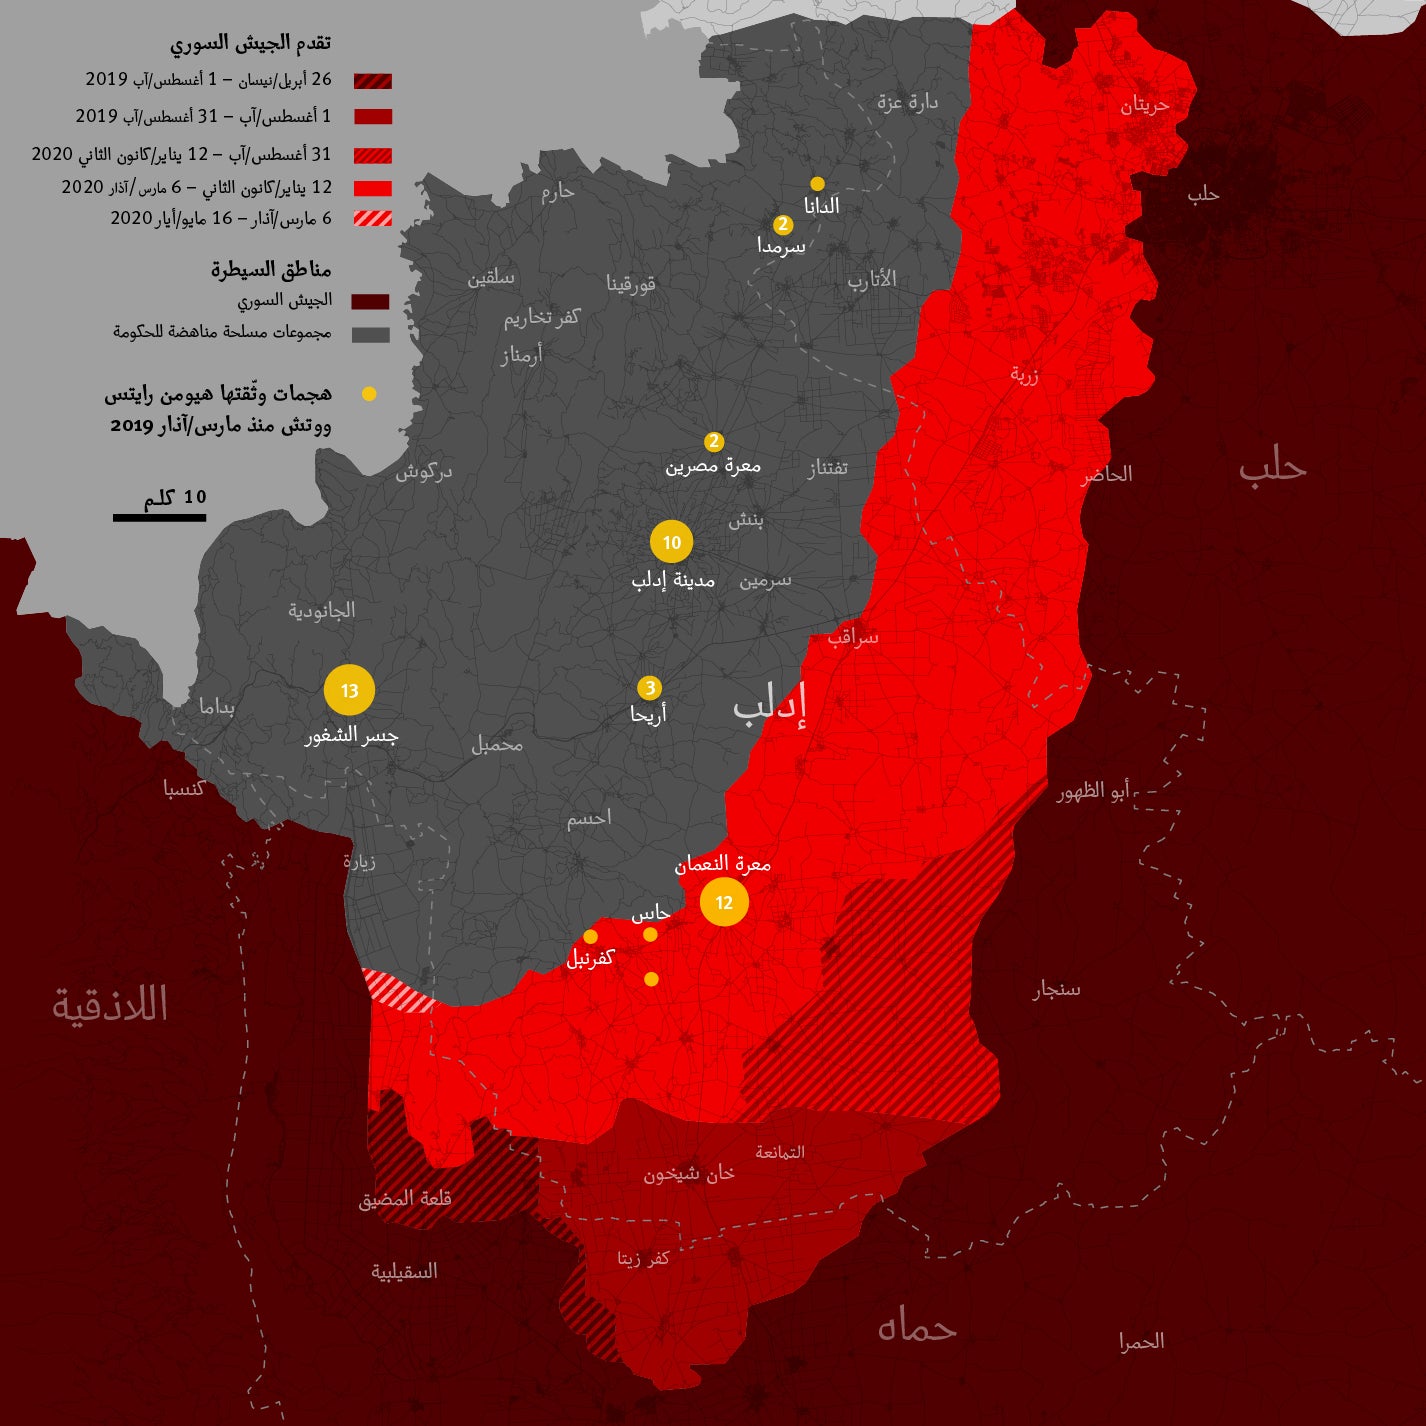 Syria Map of Control